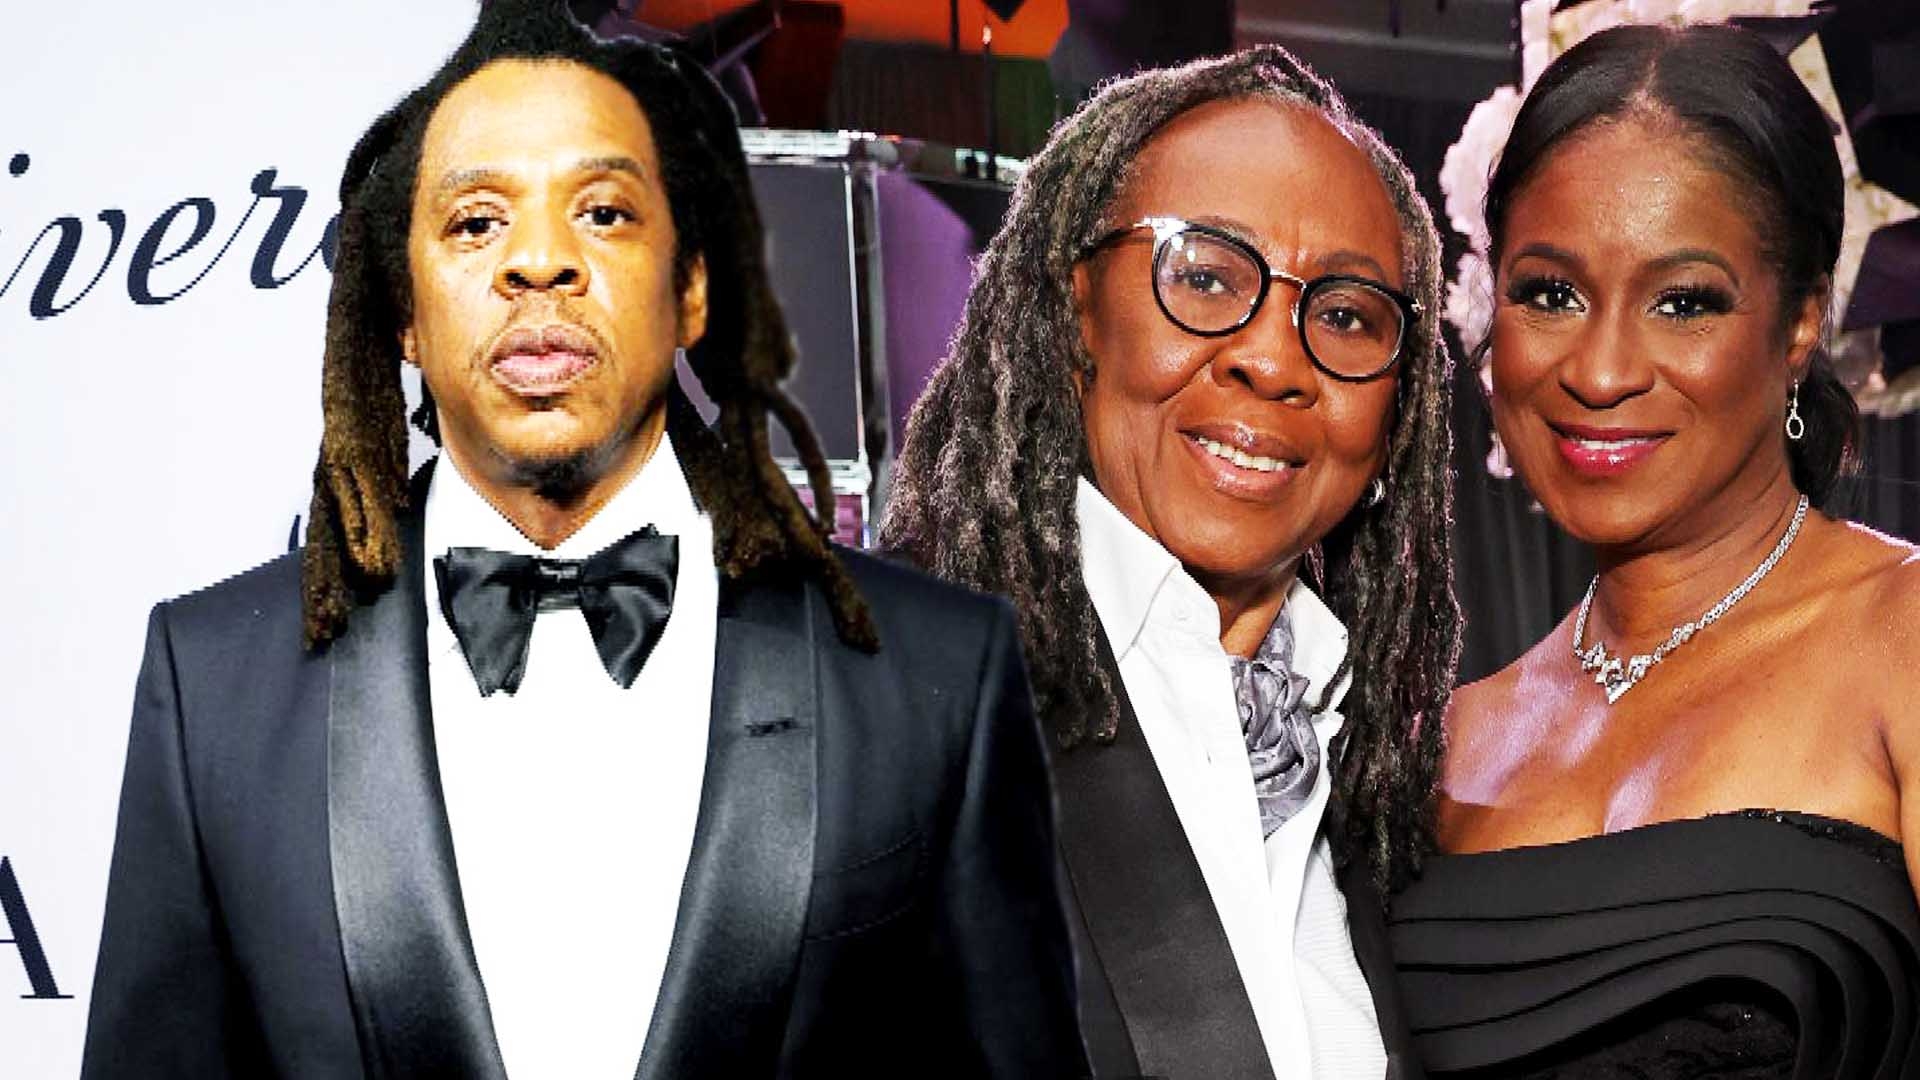 JAY-Z's Mom Gloria Carter, Wife Make Newlywed Red Carpet Debut